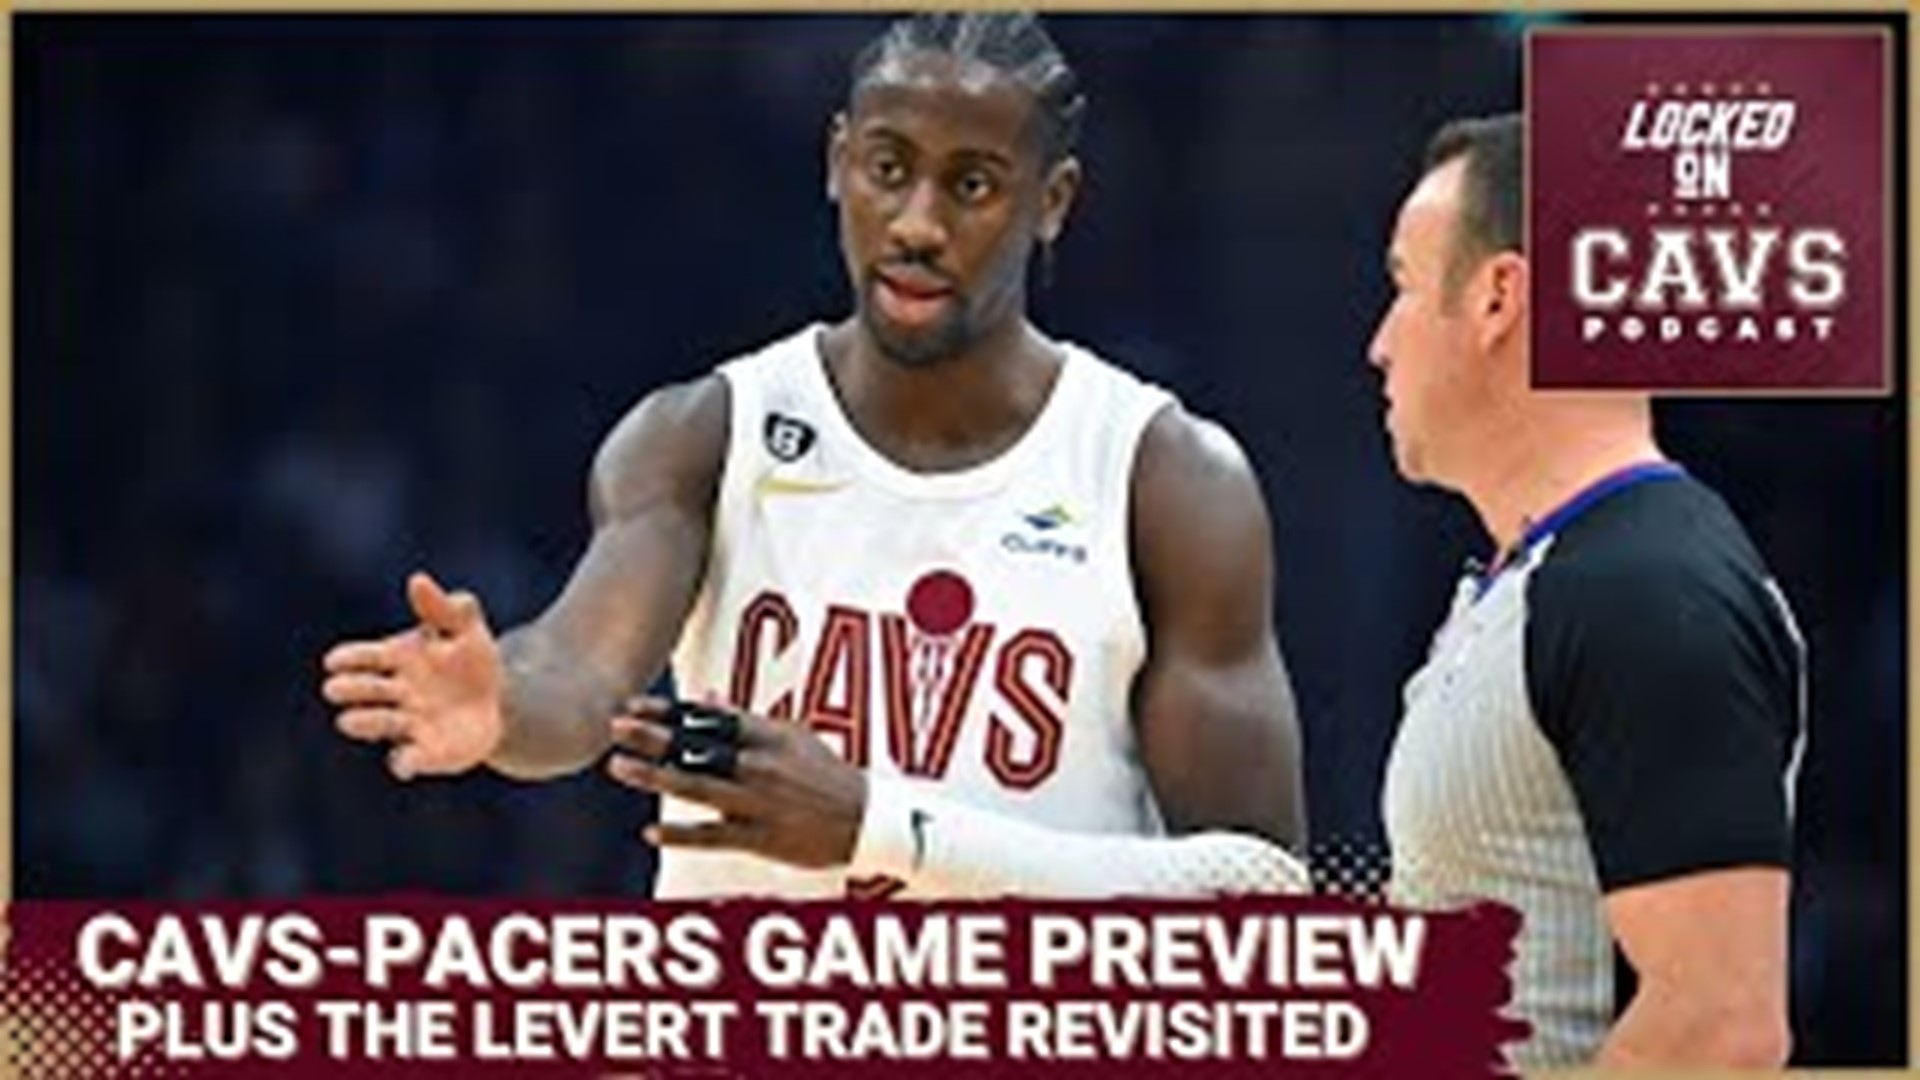 Chris Manning is joined by Tony East of Locked On Pacers to look back at last season's Caris LeVert trade.